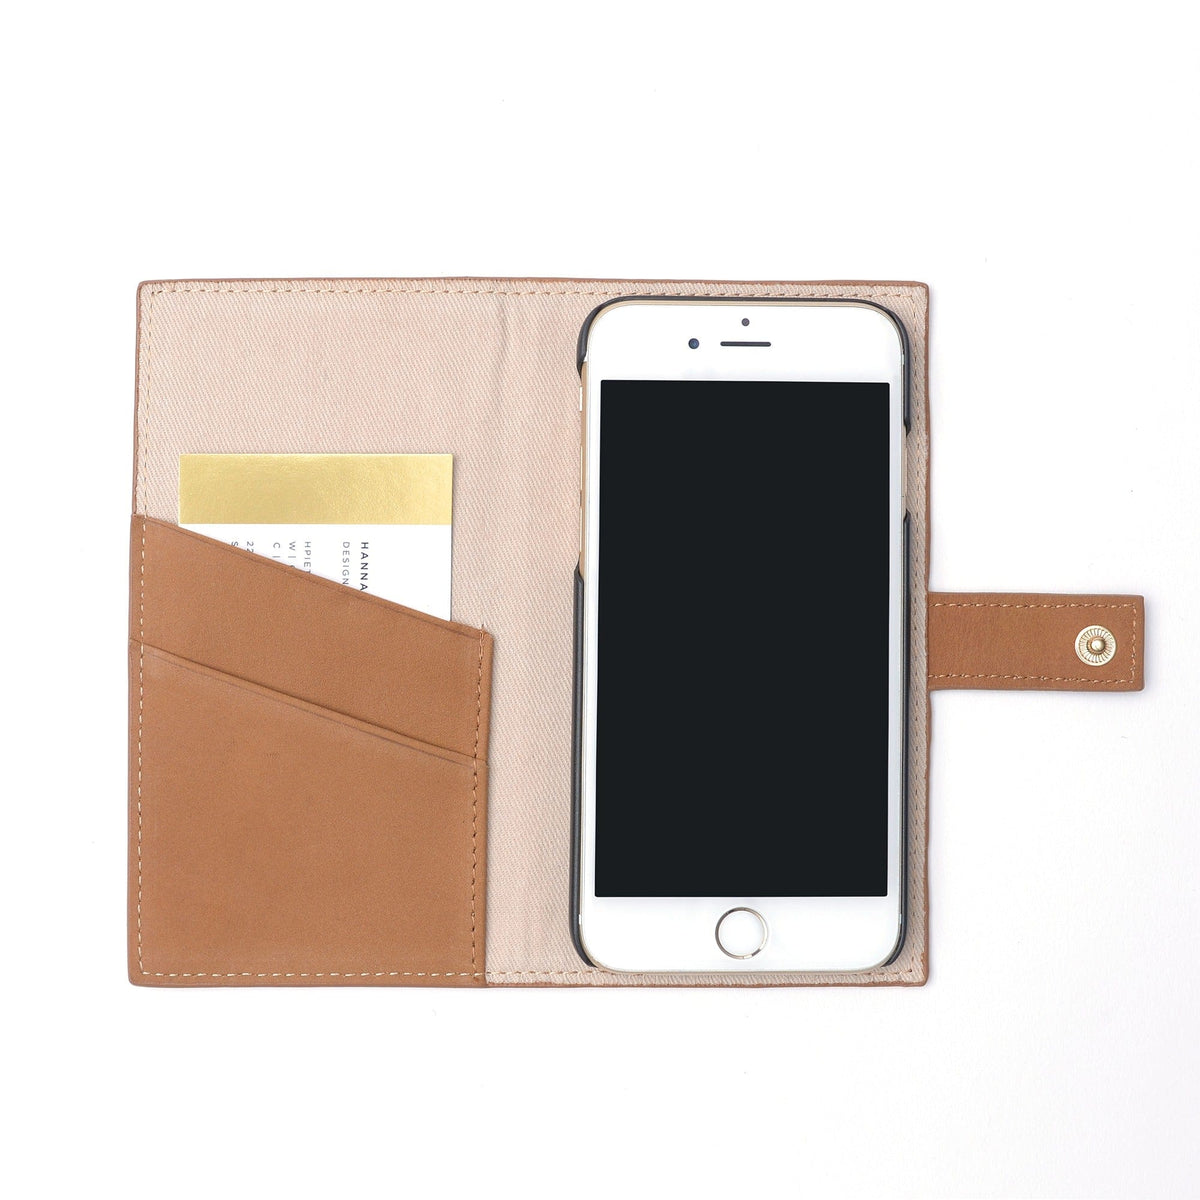 Leather Wallet + Phone Case Camel 25131 russell+hazel Phone Case